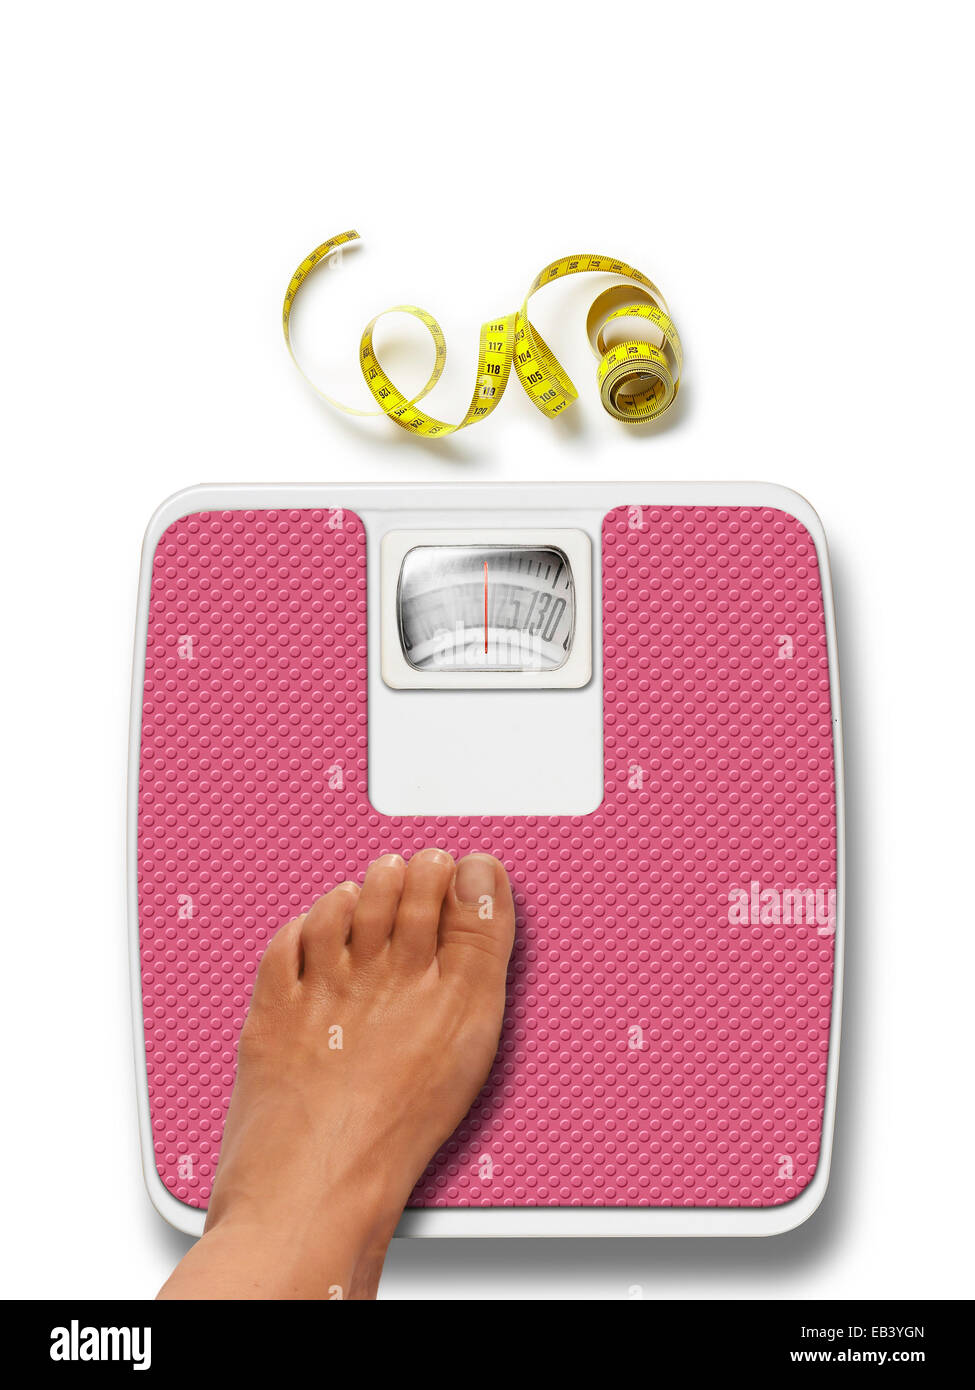 https://c8.alamy.com/comp/EB3YGN/woman-feet-and-pink-weight-scale-isolated-on-white-background-EB3YGN.jpg